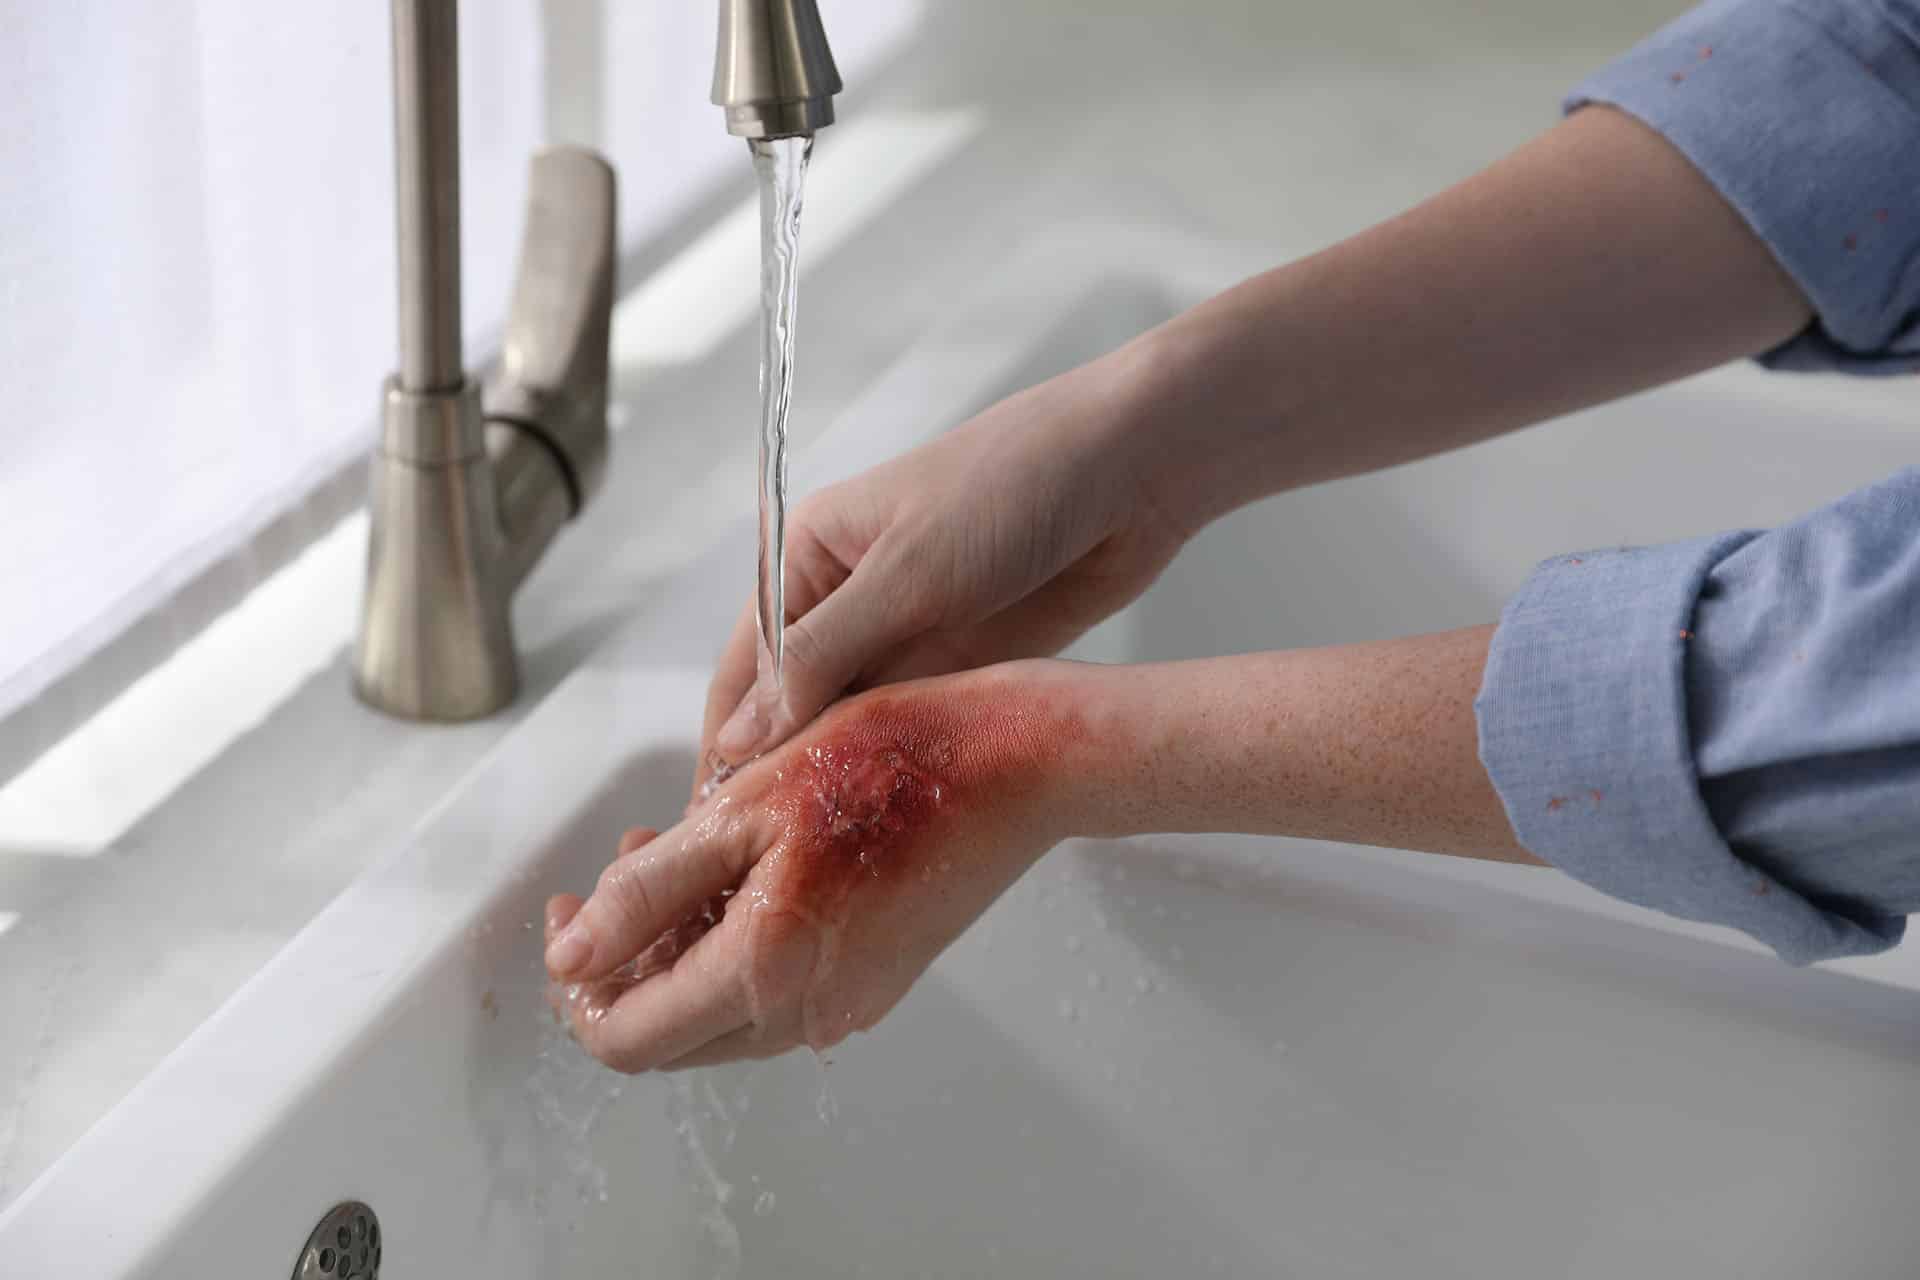 Woman holding hand with burn under flowing water indoors